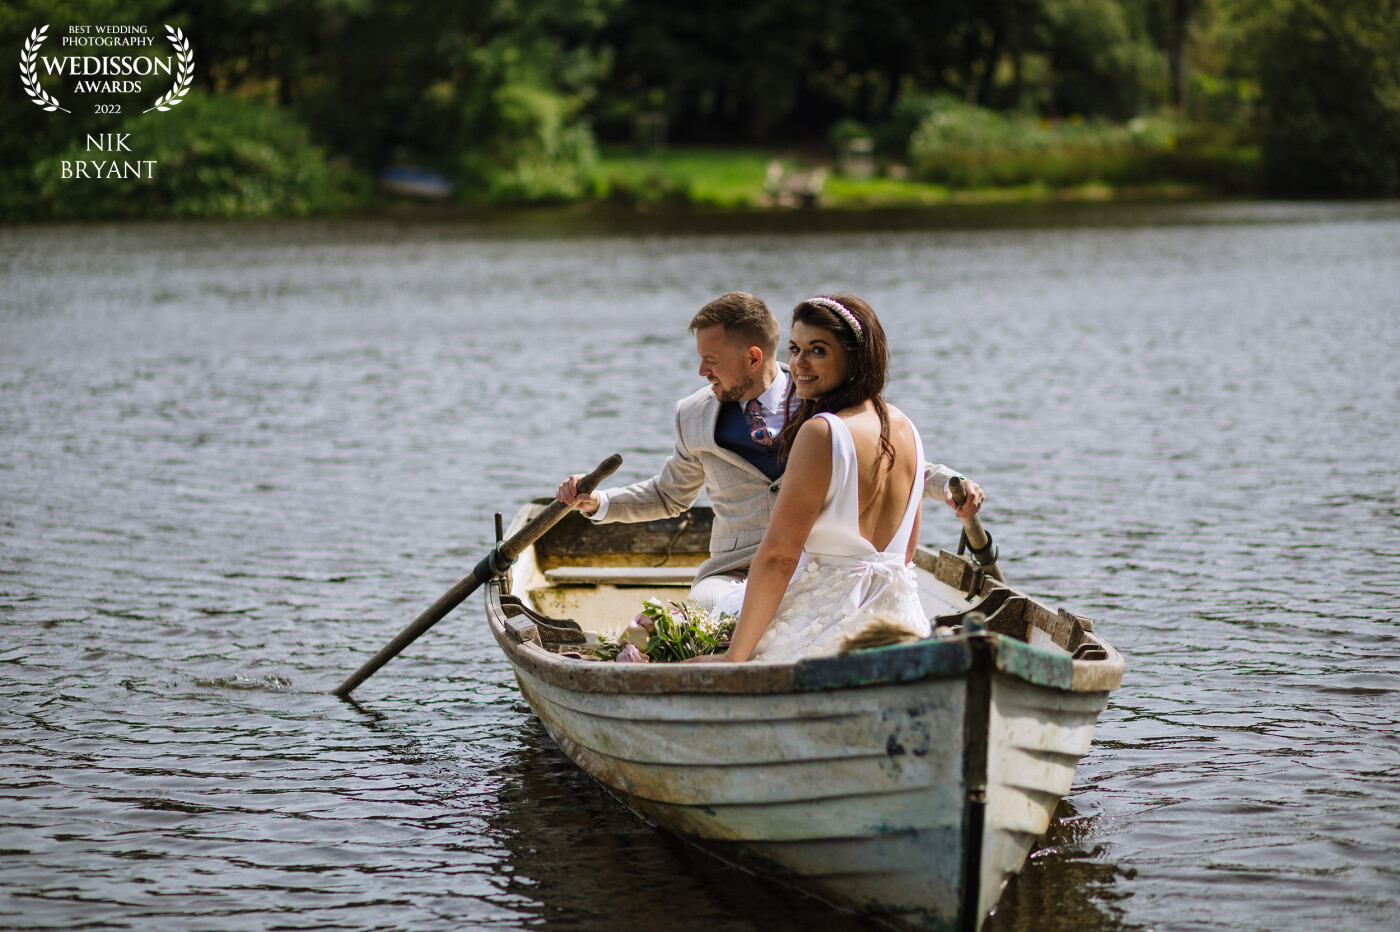 Taken on from a jetty while the bride and groom took the boat out on the lake at Wyresdale Park. I really love this shot as it took the bride some convincing to get into the boat but it was totally worth it